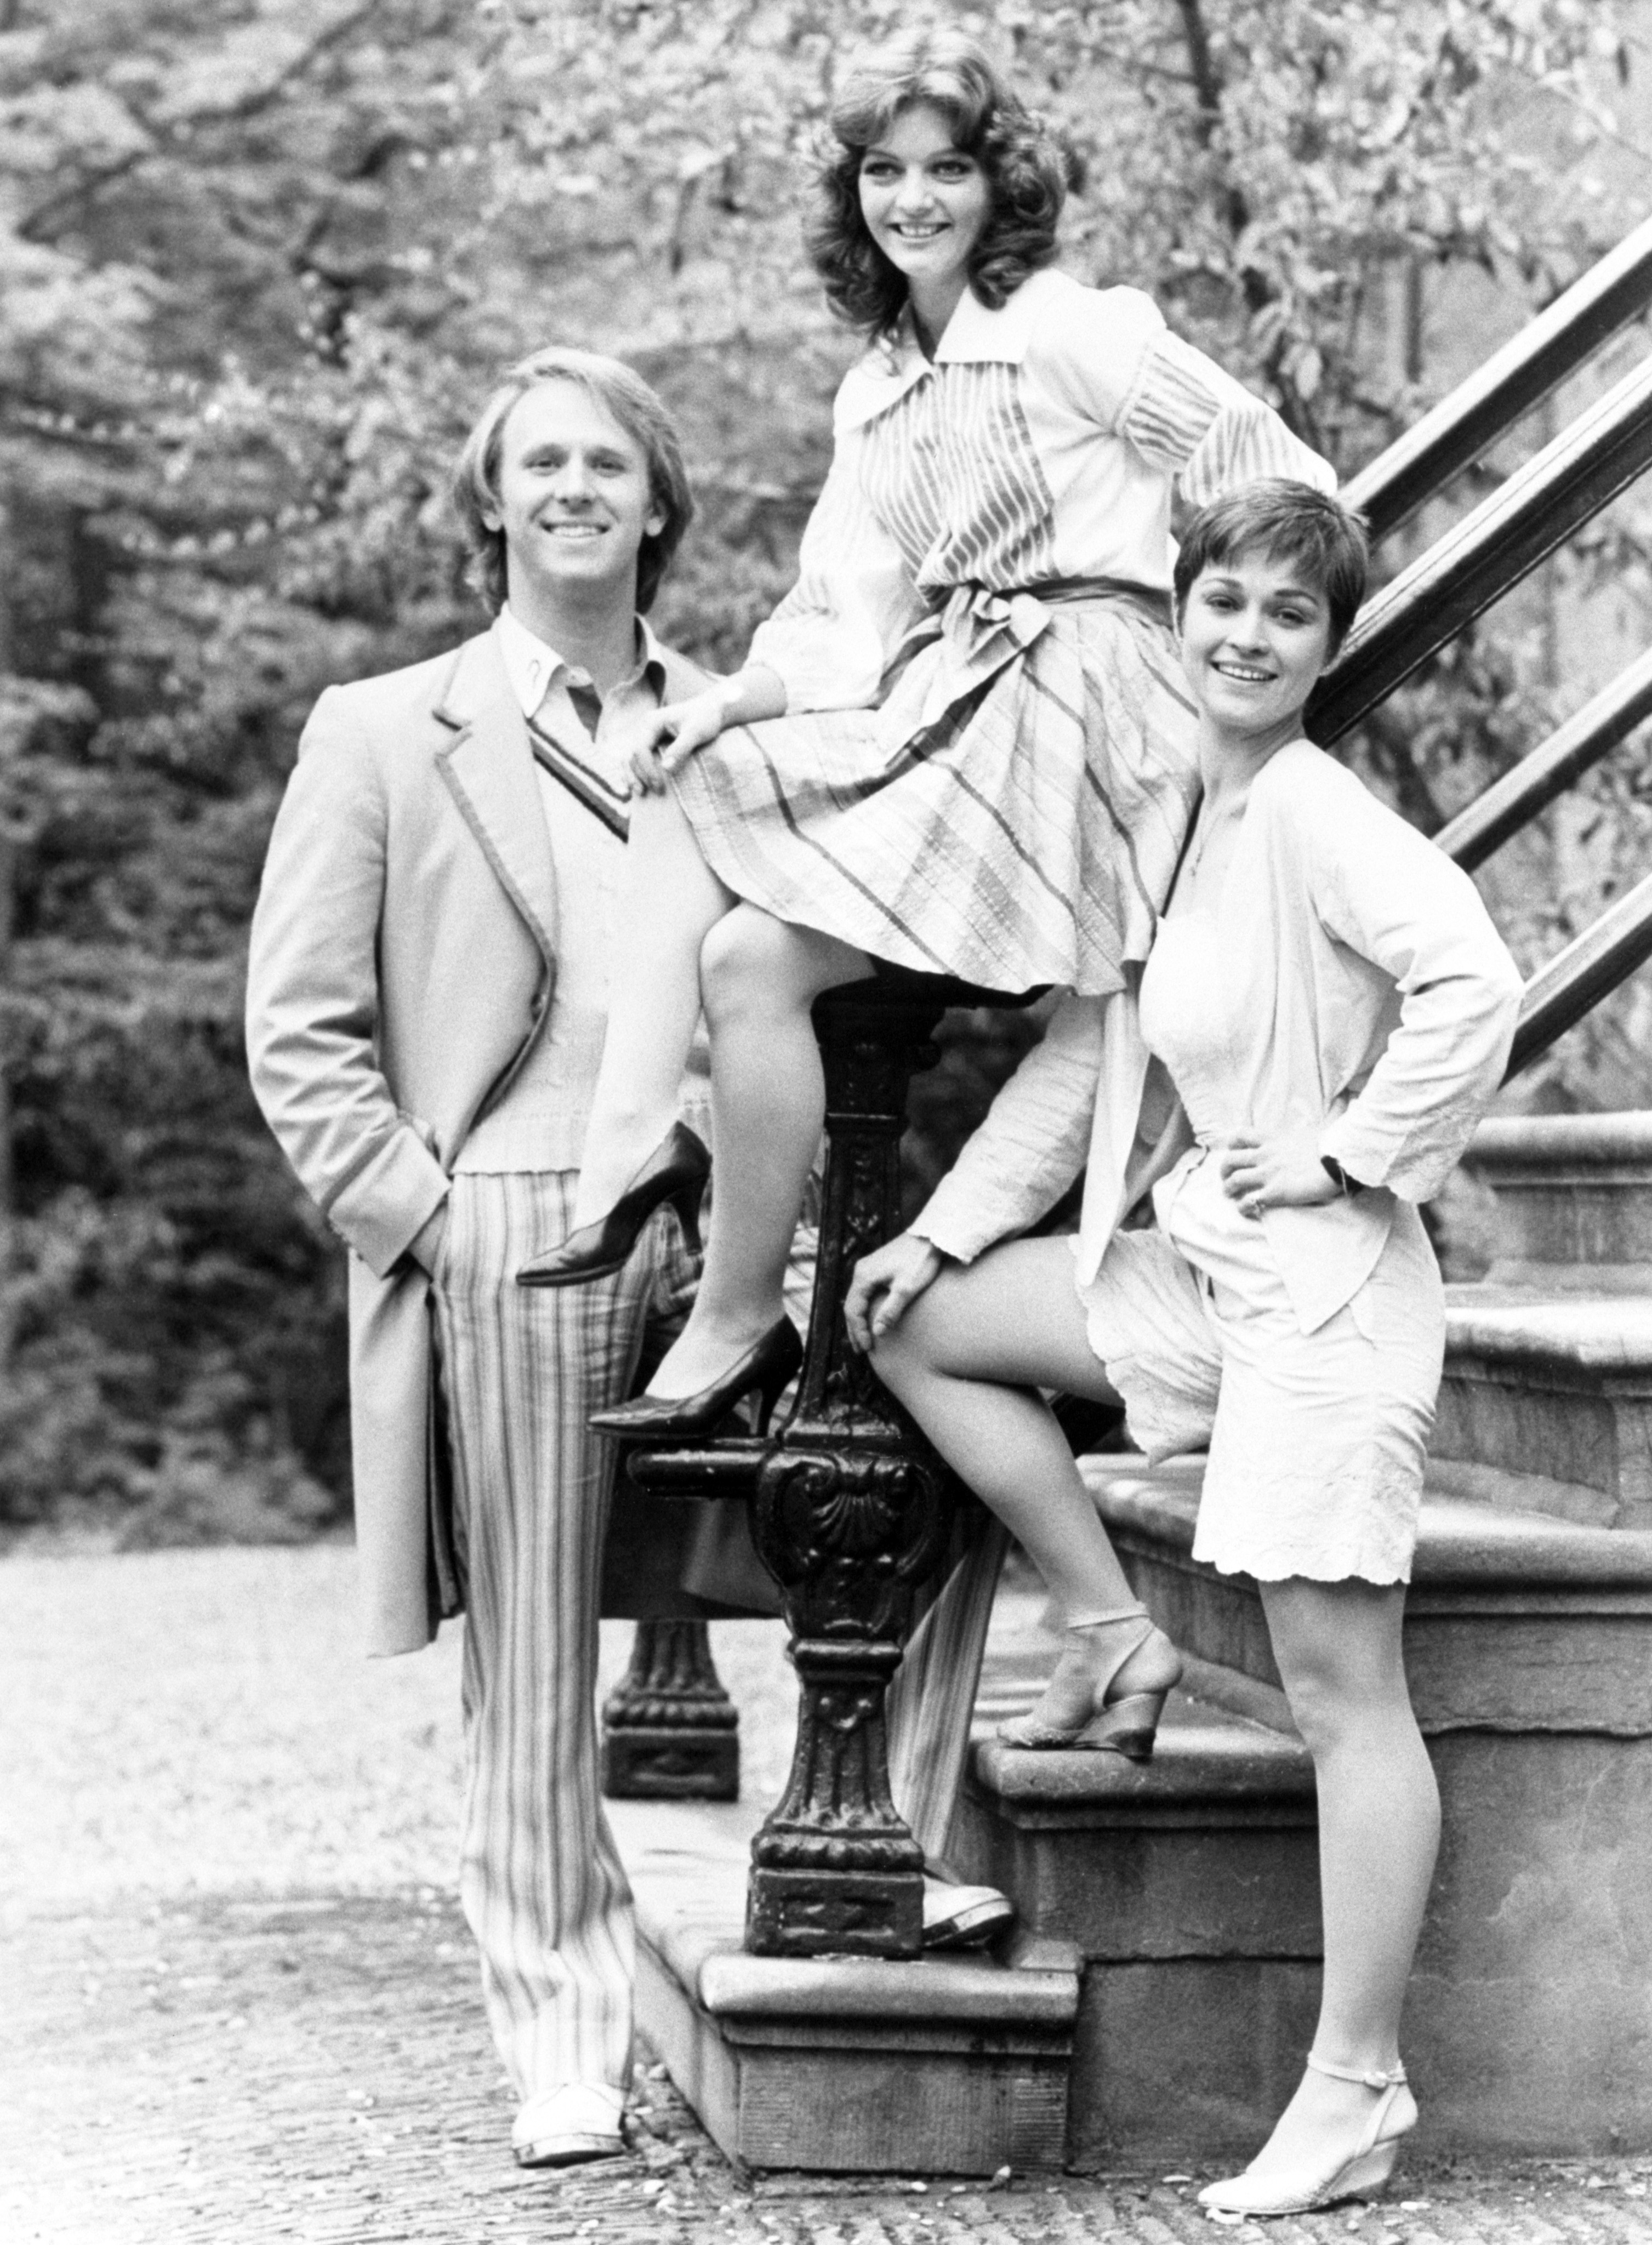 Peter Davison as the Doctor with companions Sarah Sutton and Janet Fielding